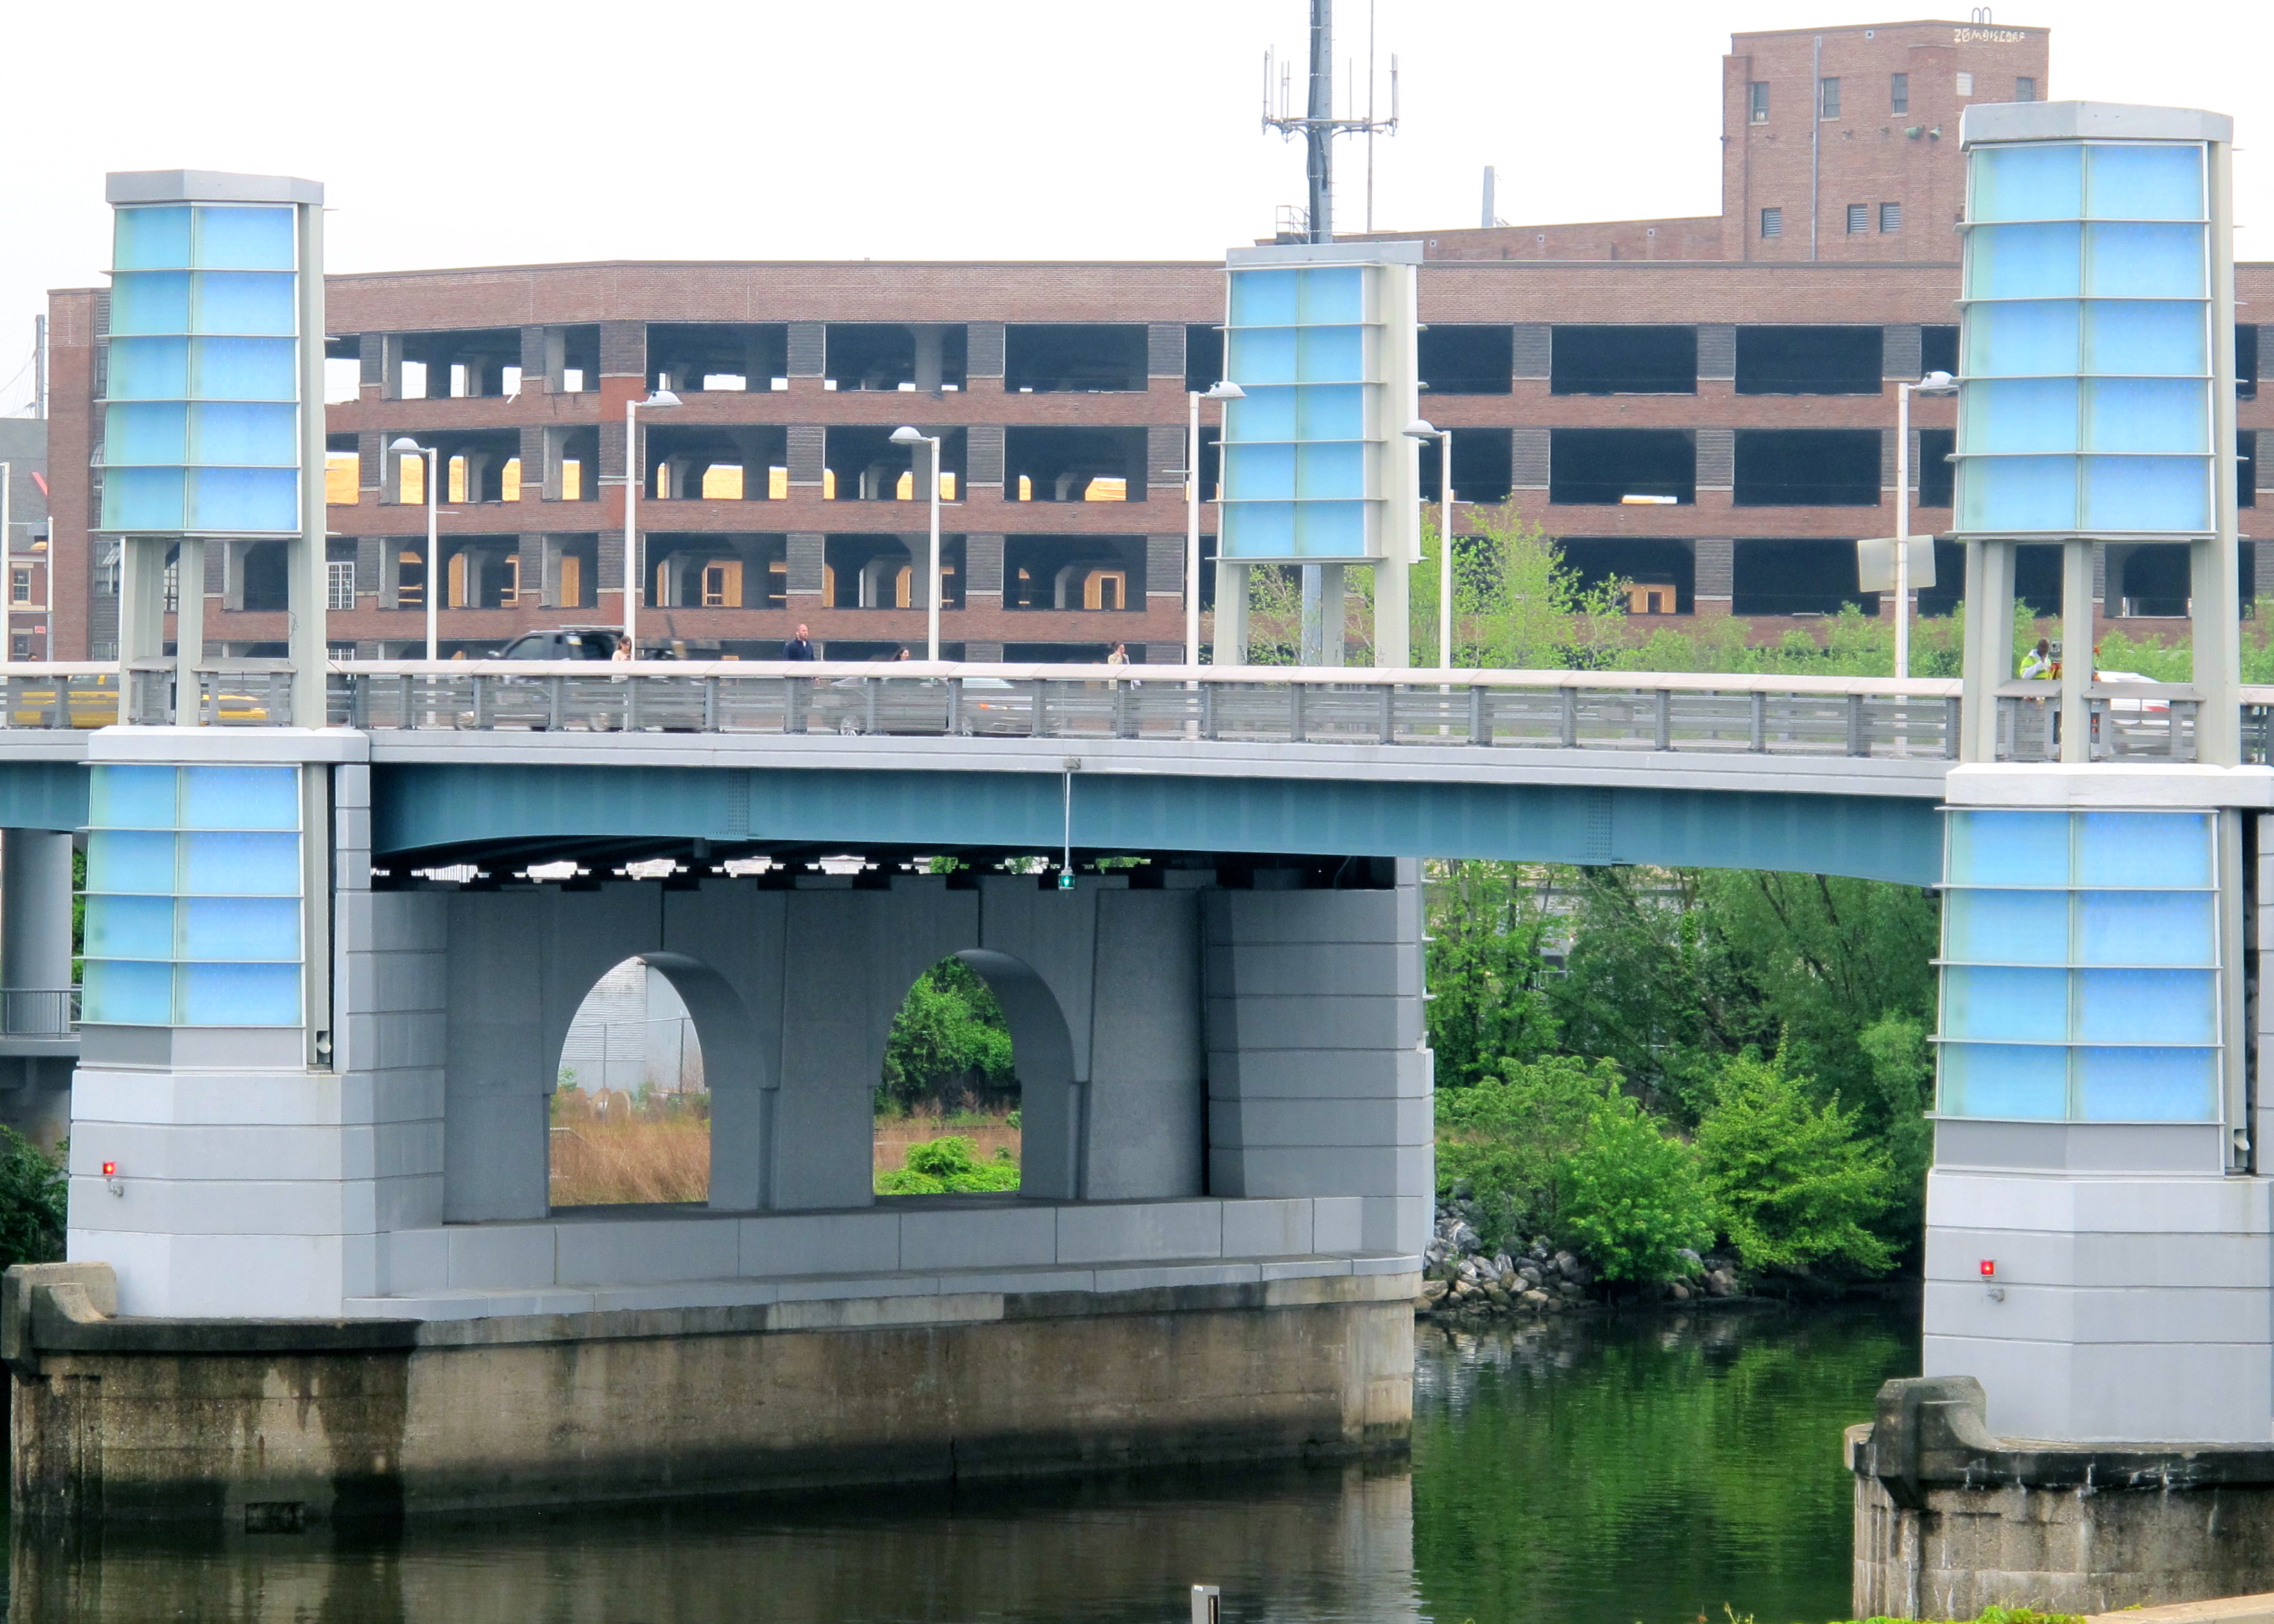 In May the South Street Bridge's new LED lights were tested, and on Monday the towers will finally be lit.